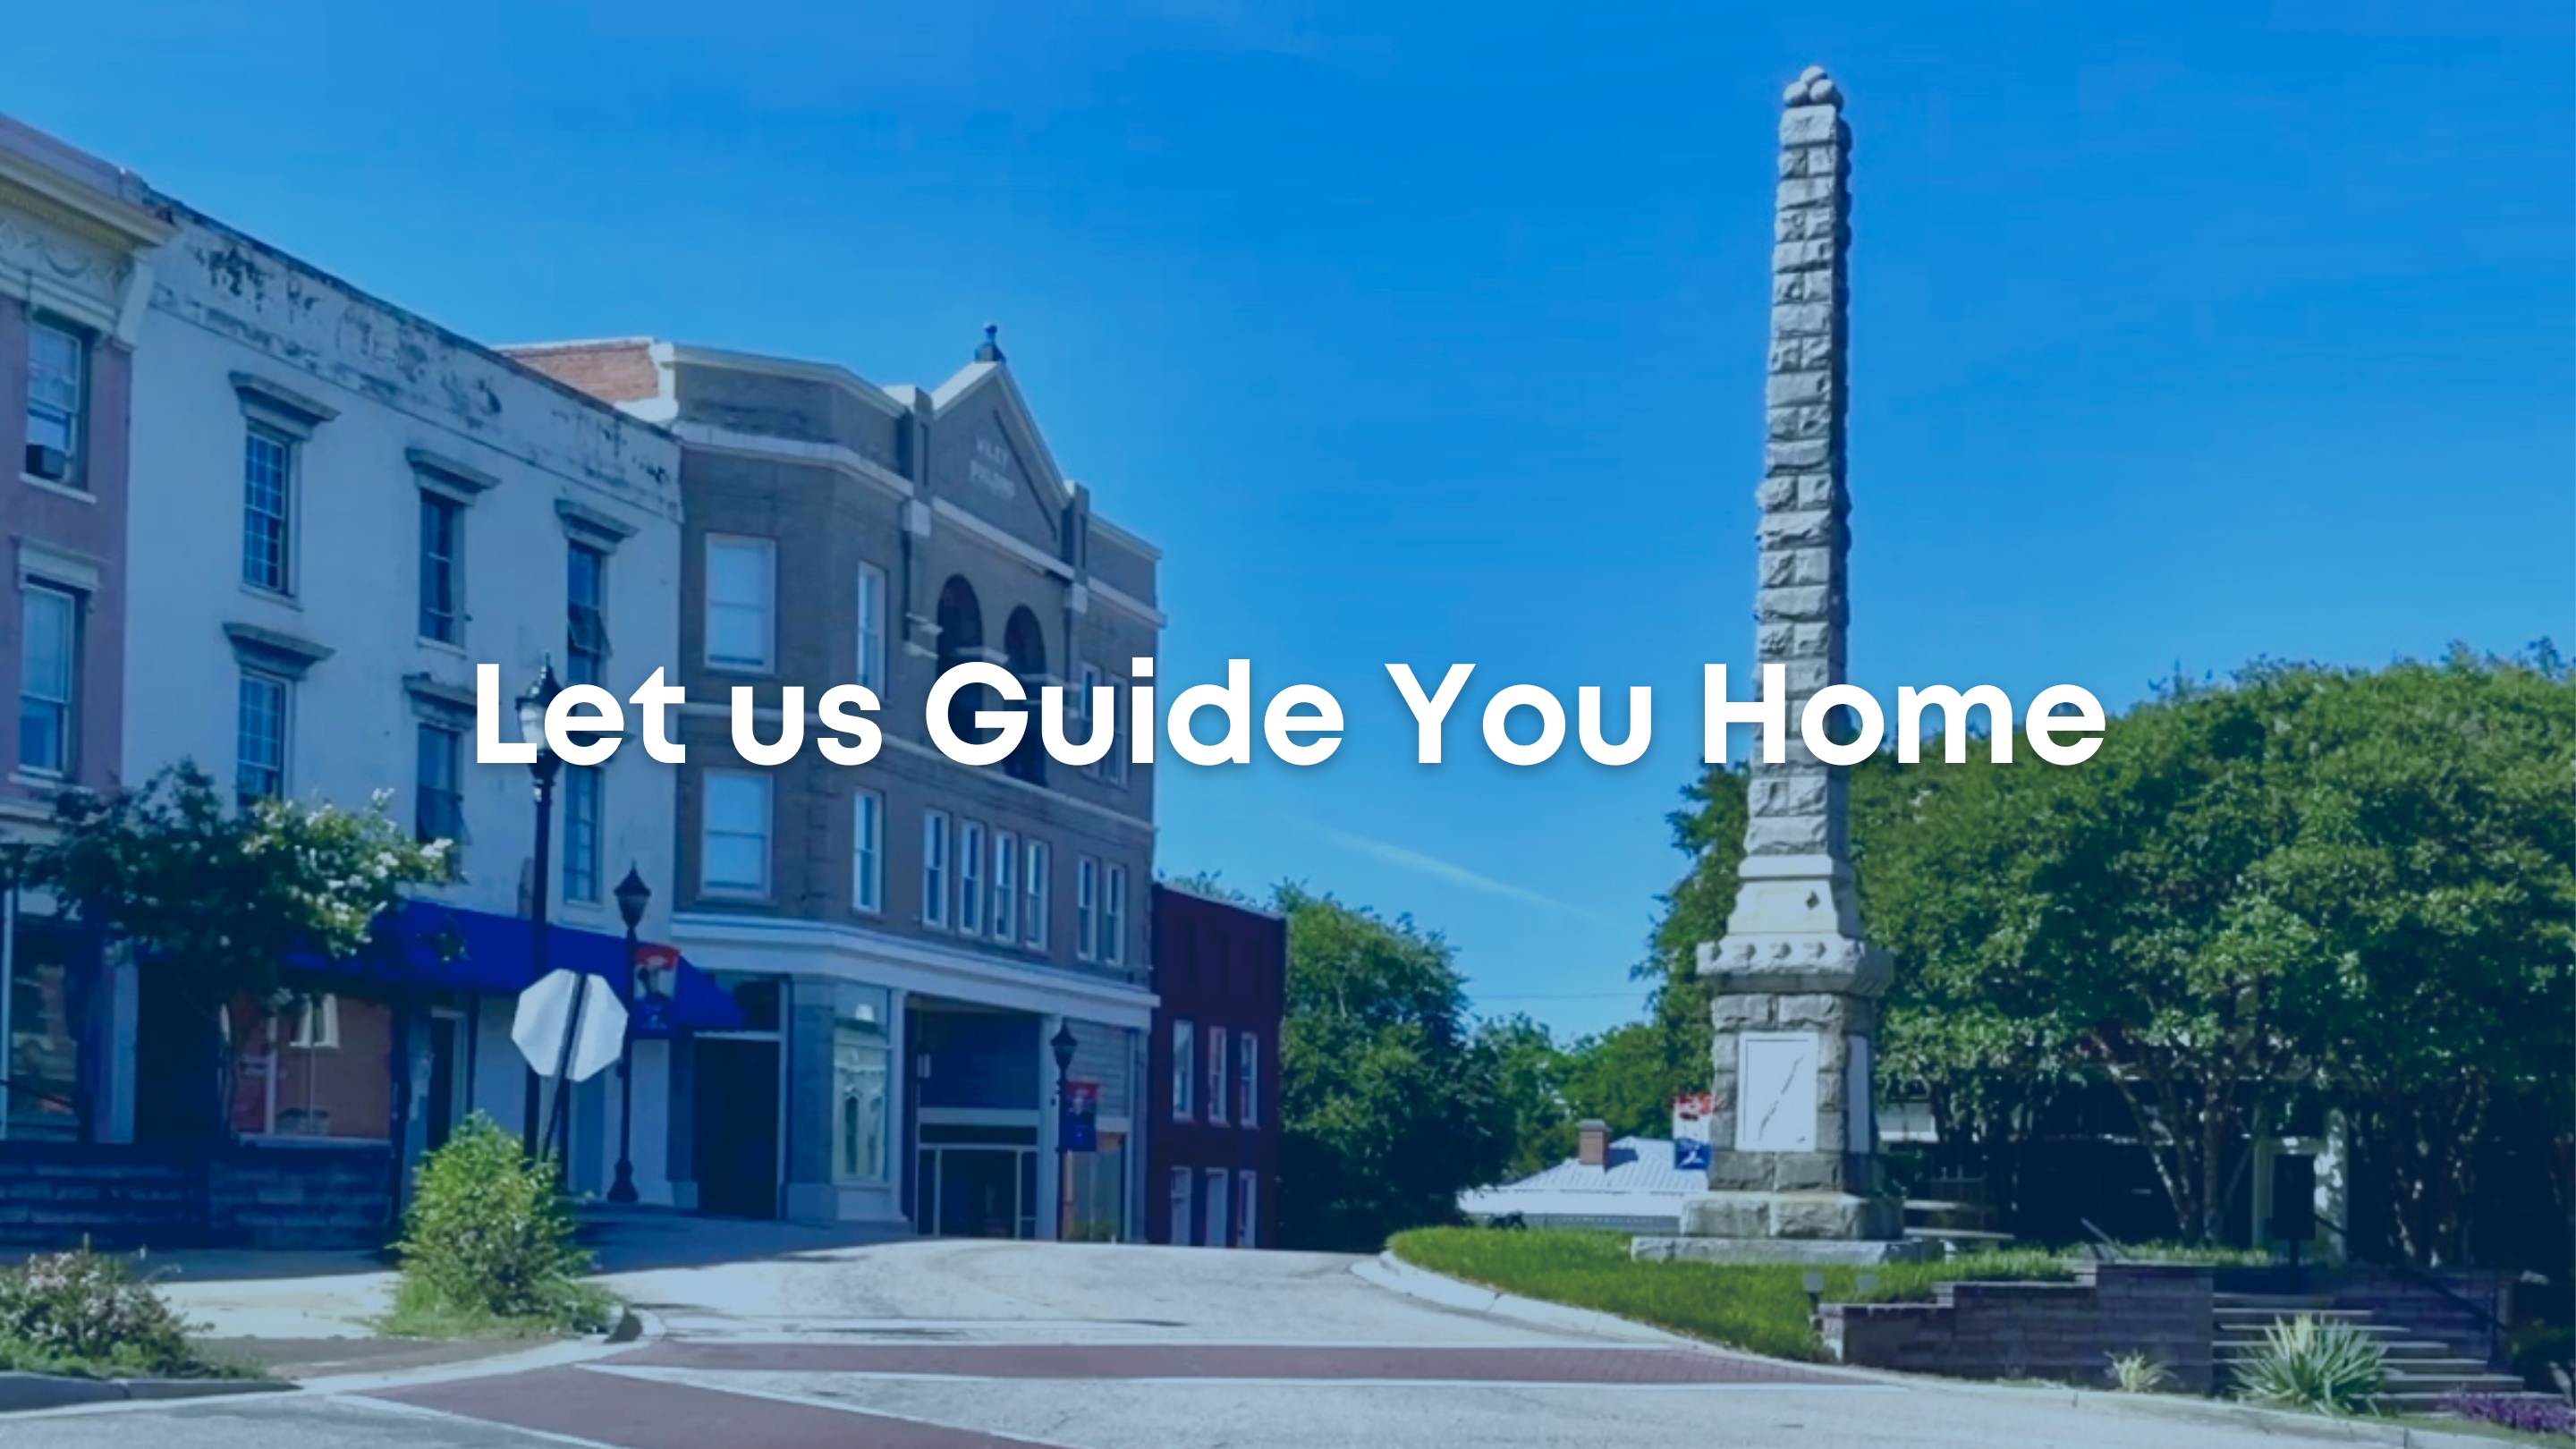 Let us guide you home